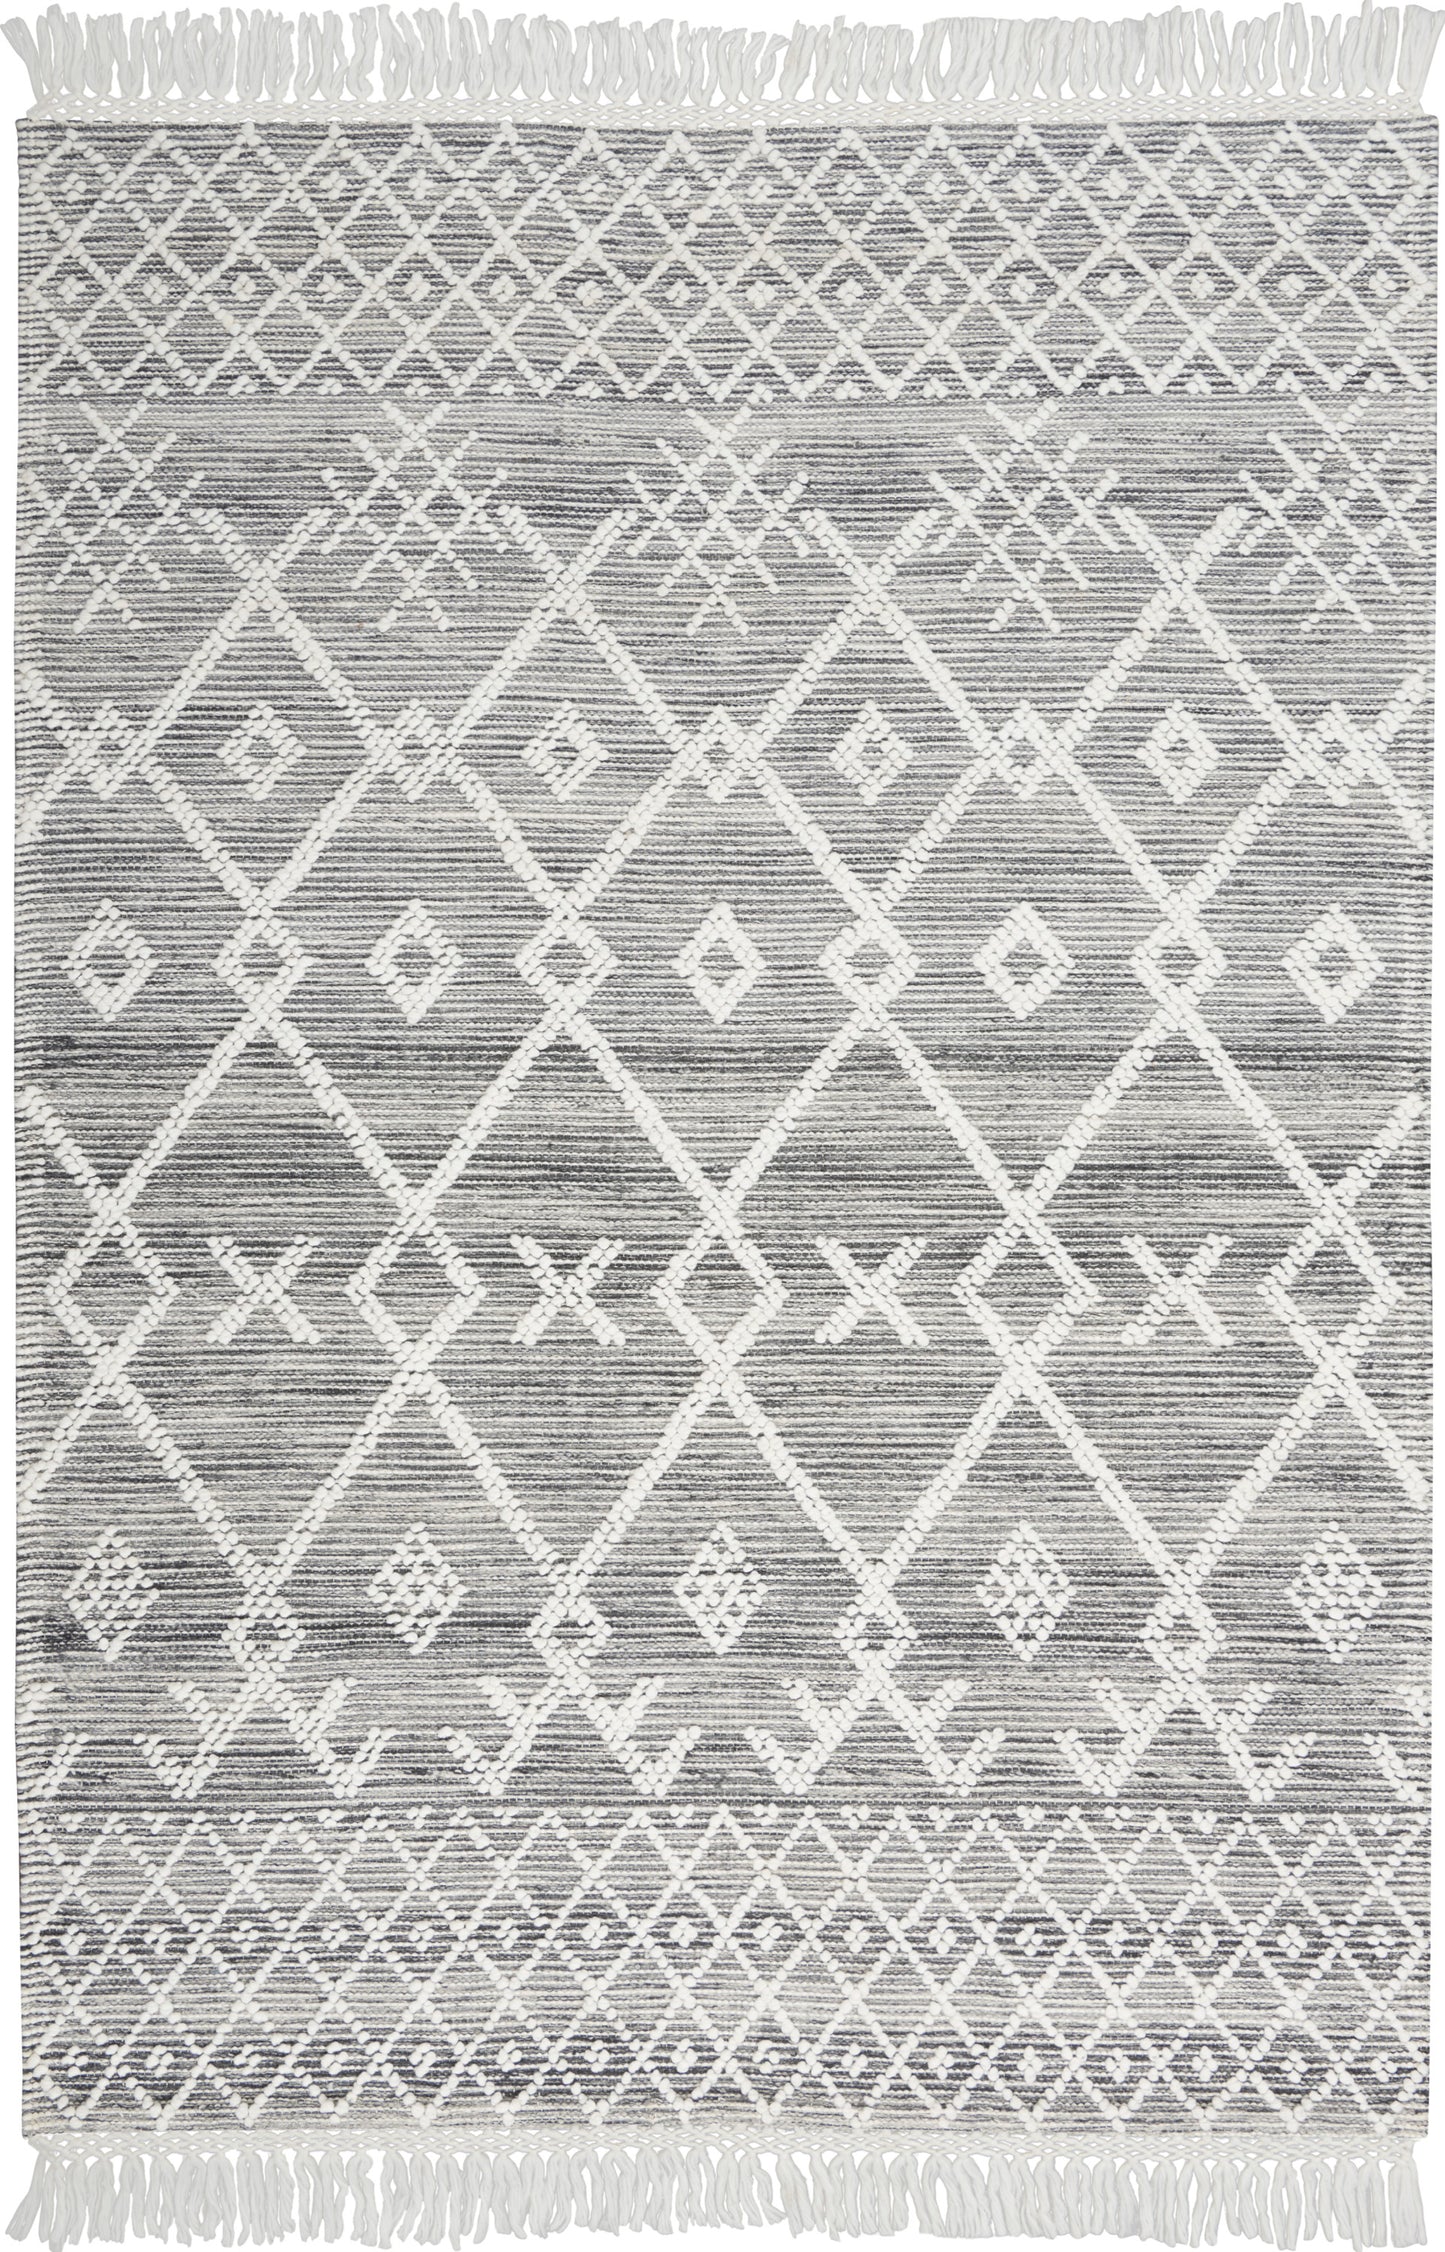 Nicole Curtis Series 3 SR302 Grey Ivory Contemporary Woven Rug